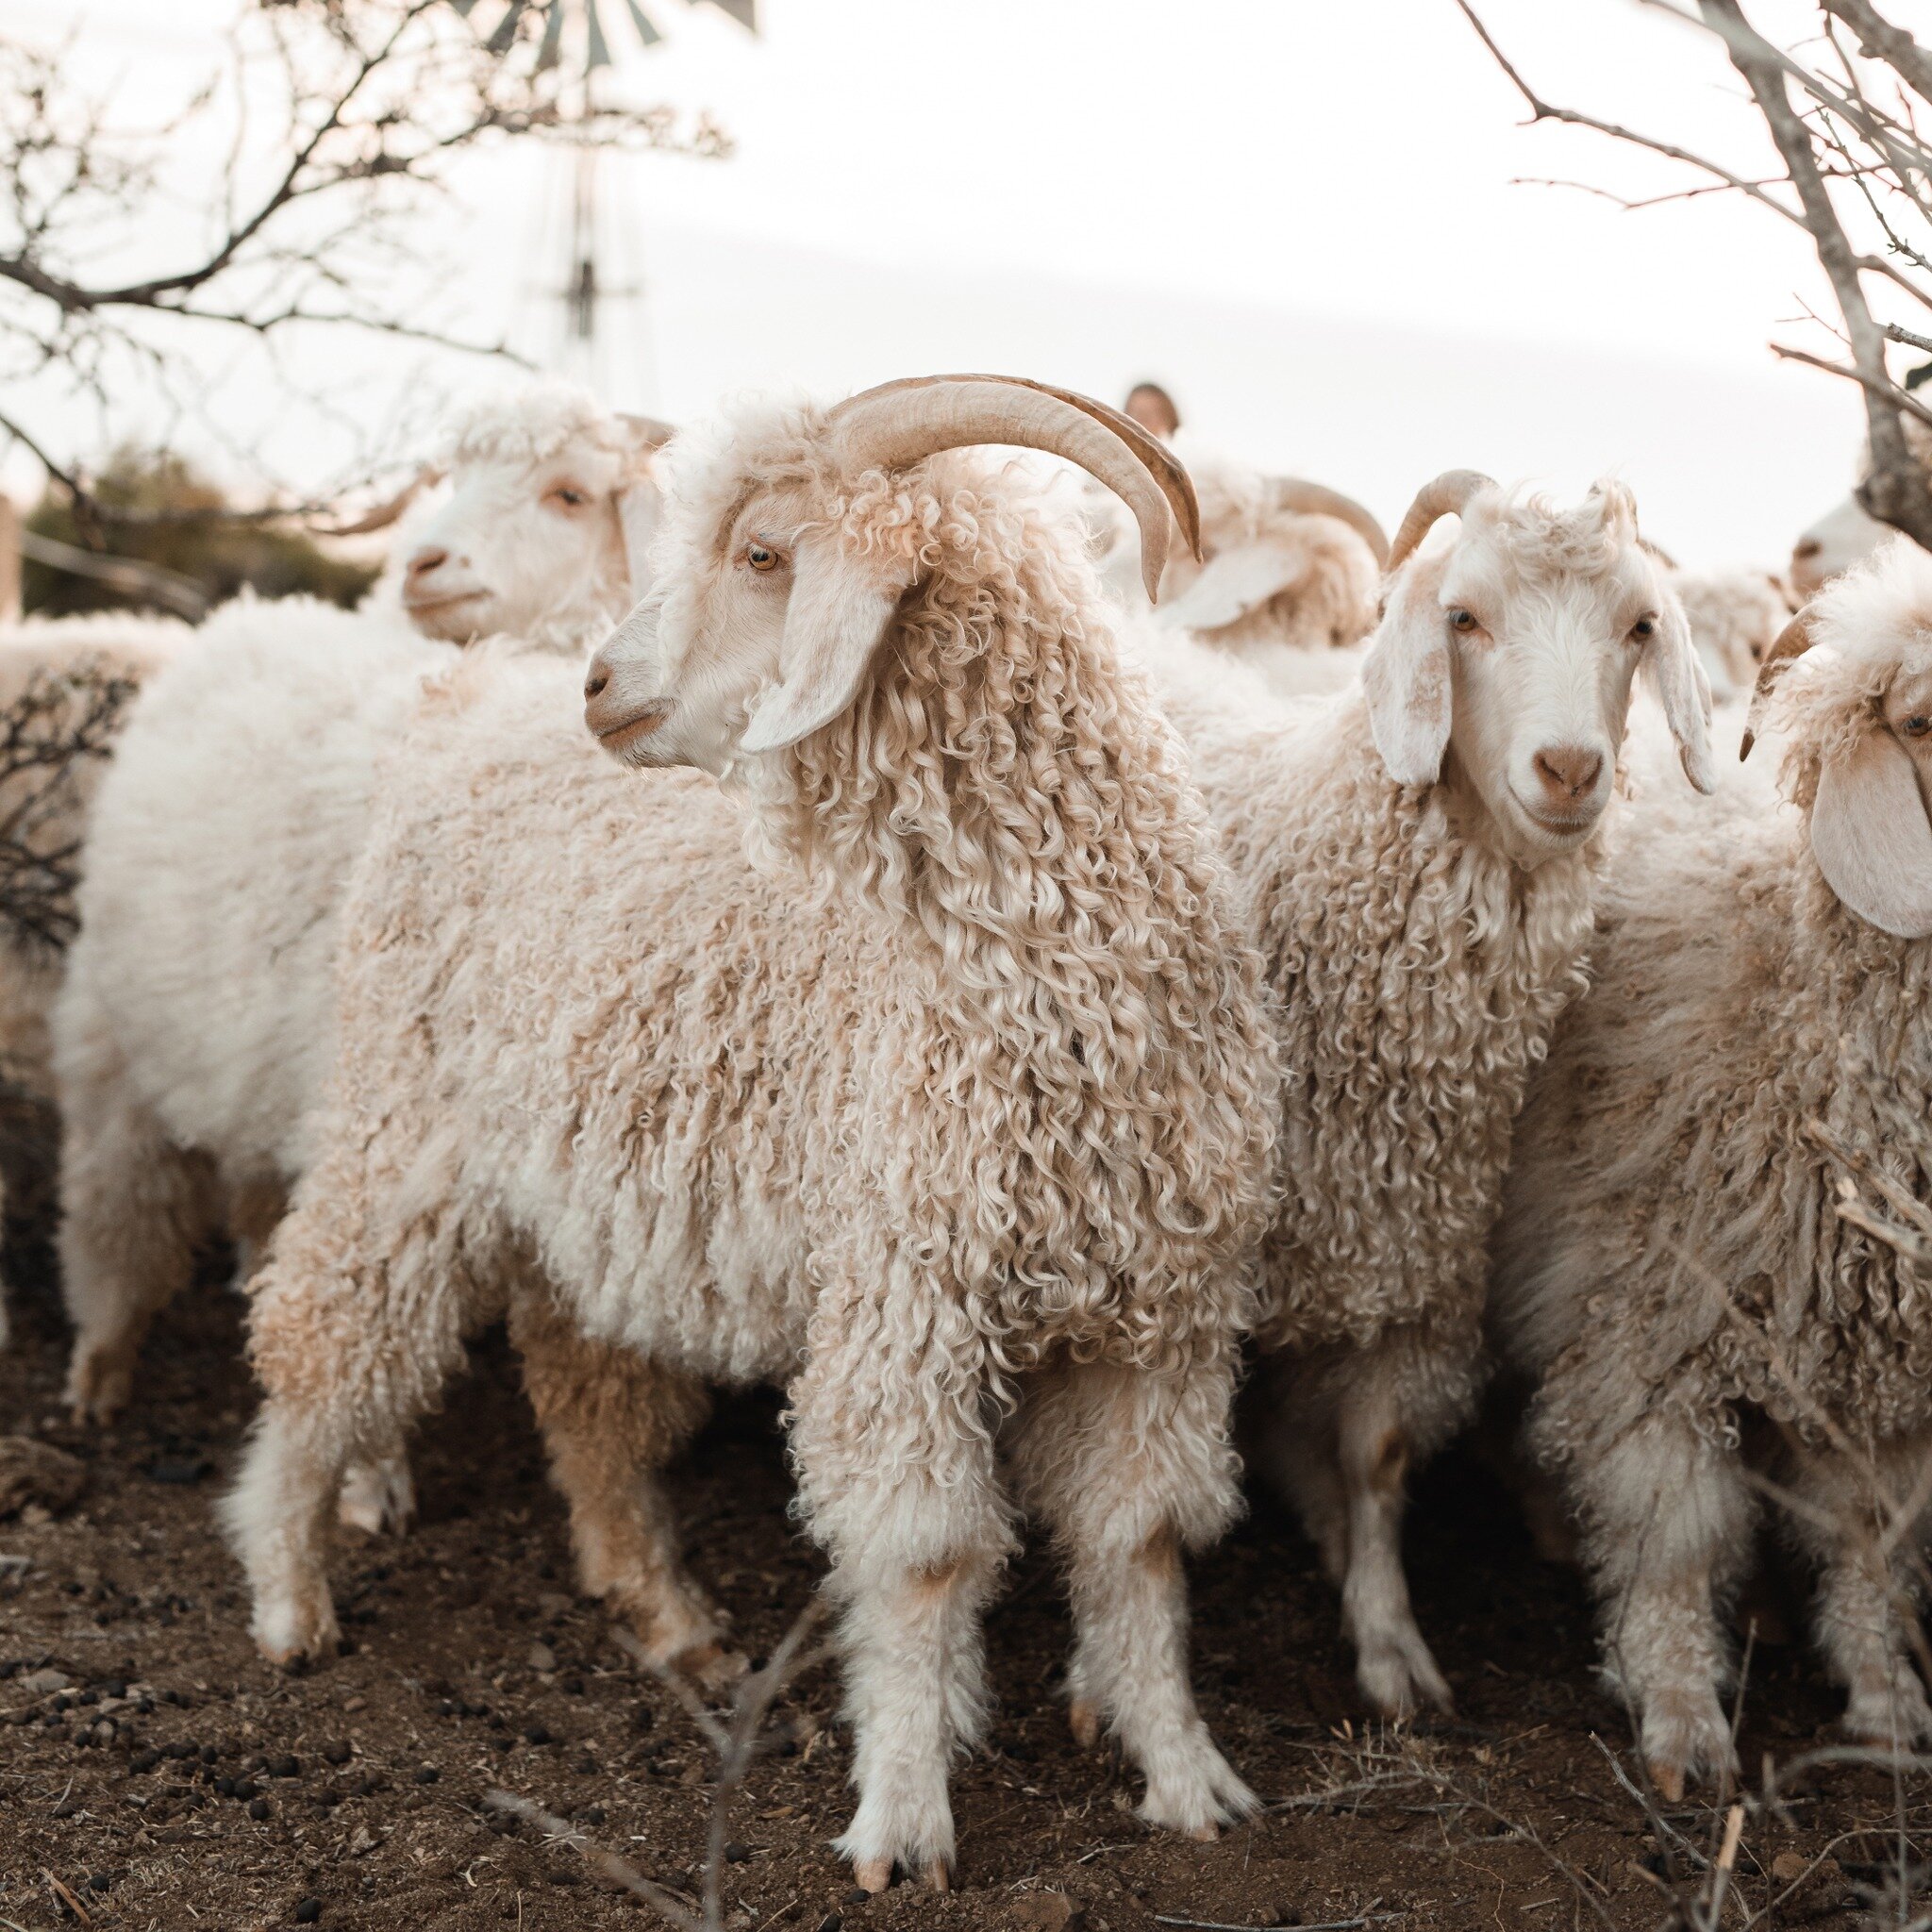 This is where the mohair value chain begins - with the beautiful angora goats! From farm to finished products 🐐 Shop a wide range of mohair items Studio Mohair, from luxurious home wear products to beautiful hand knitted fashion items. All your #moh